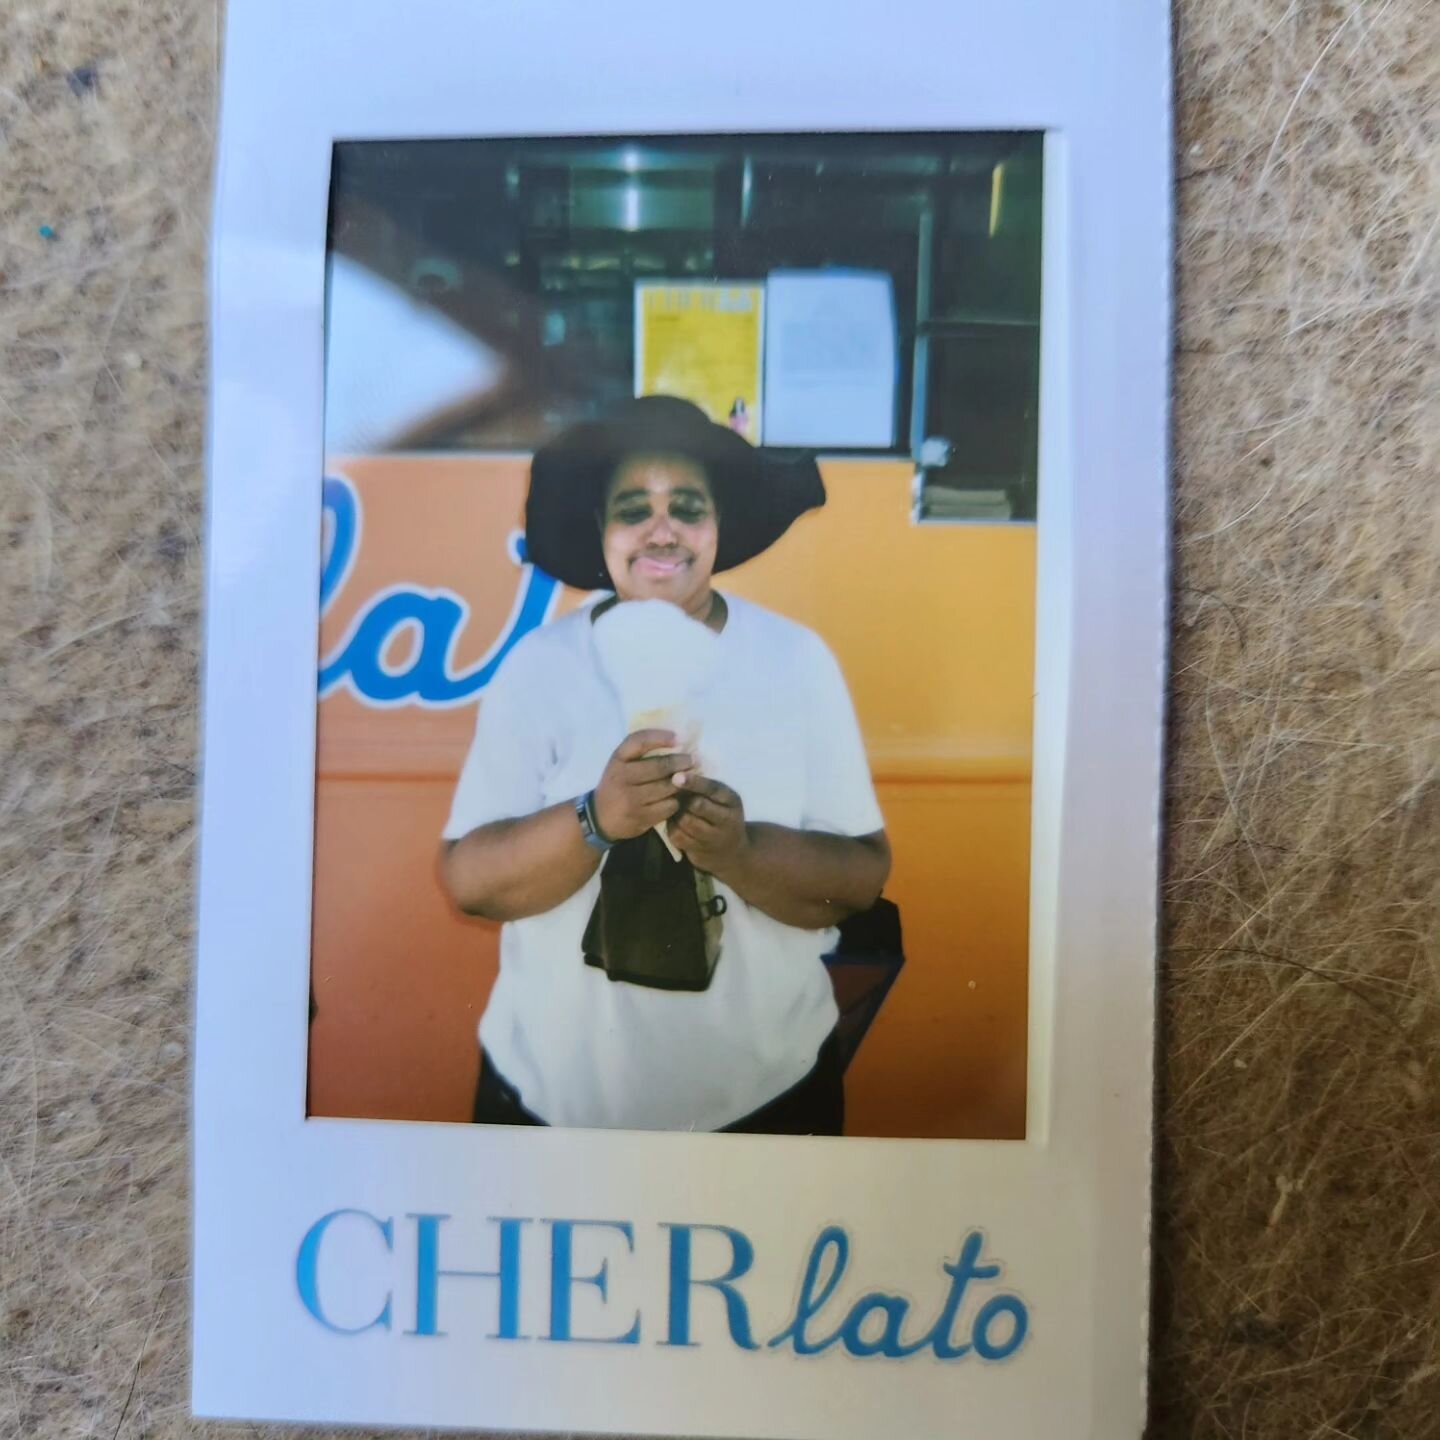 Just had a Cherlato! I got the kefir and cardamon with cotton candy. So refreshing. Thanks, Cher!

#cher #cherlato #gelato #dessert #cottoncandy #polaroid